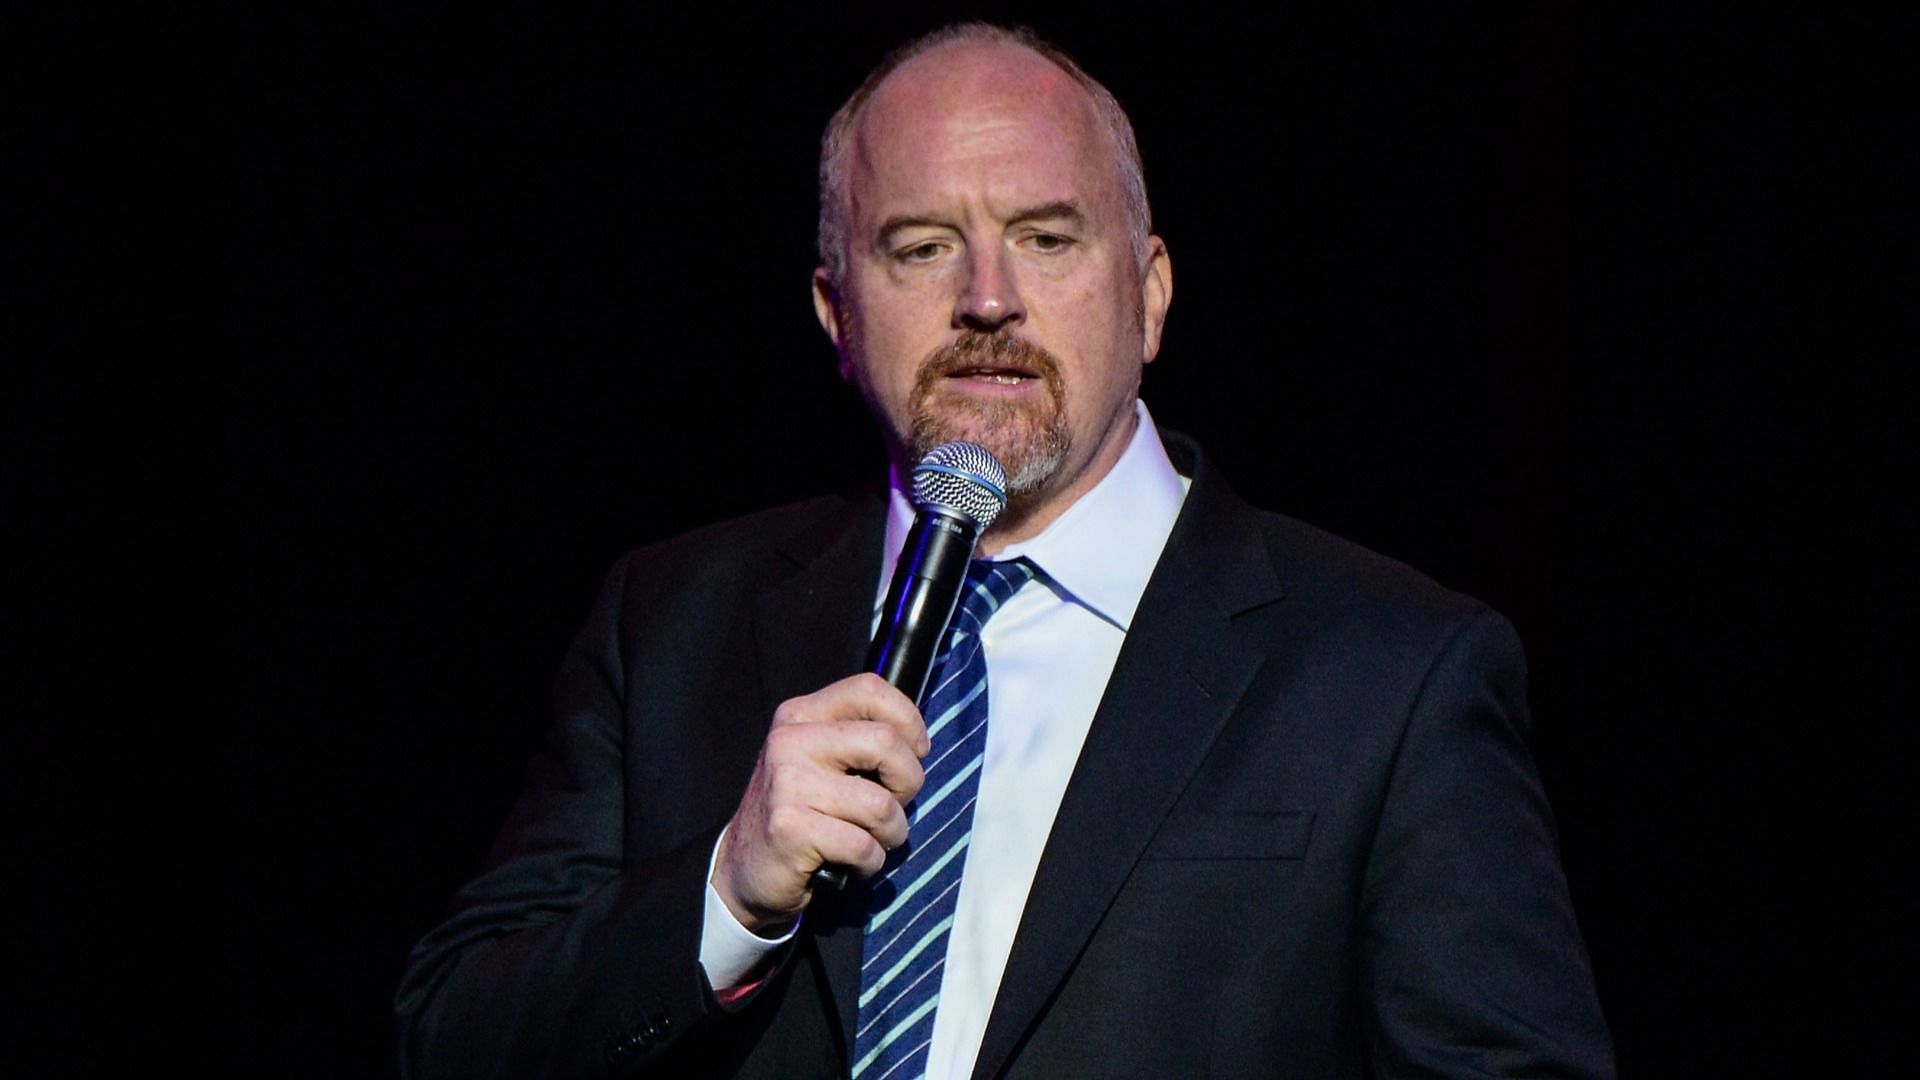 Louis CK admitted to his several s*xual misconducts in 2017 (Image via Getty Images/Kevin Mazur)